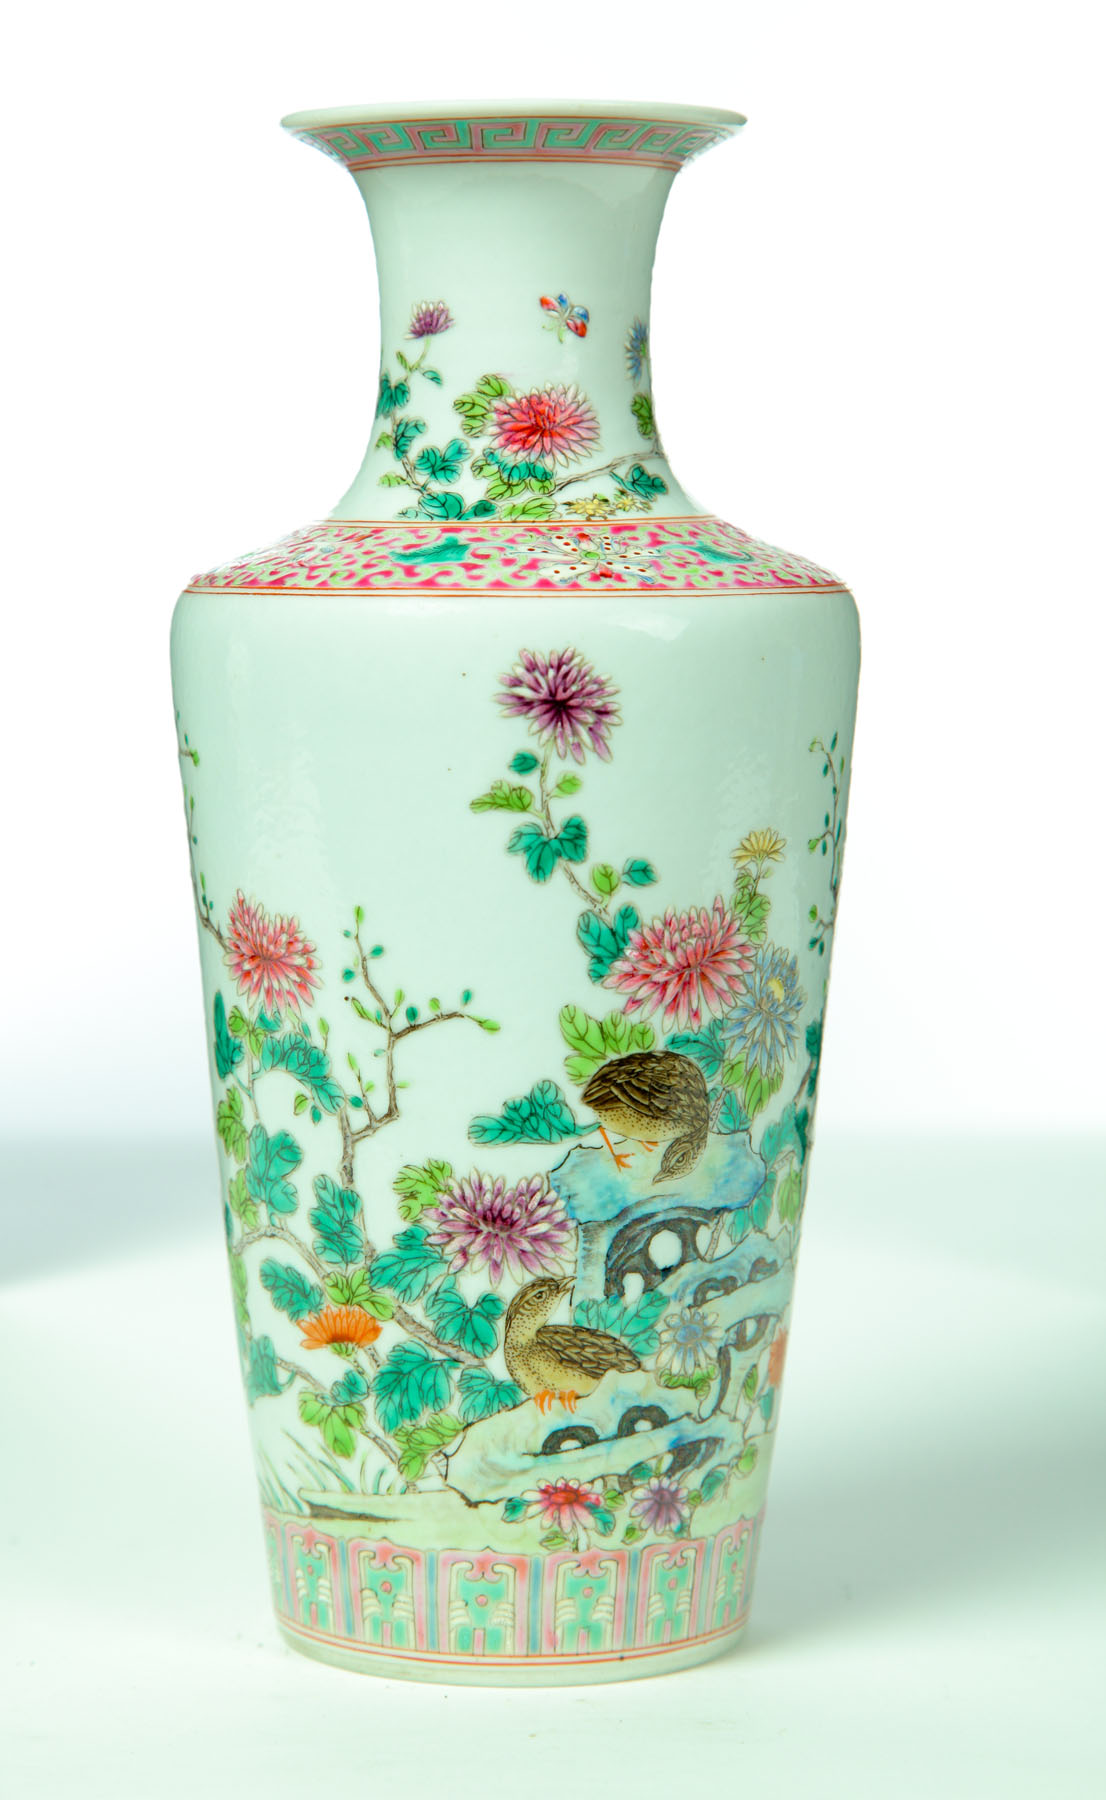 VASE.  China  late 19th-early 20th century